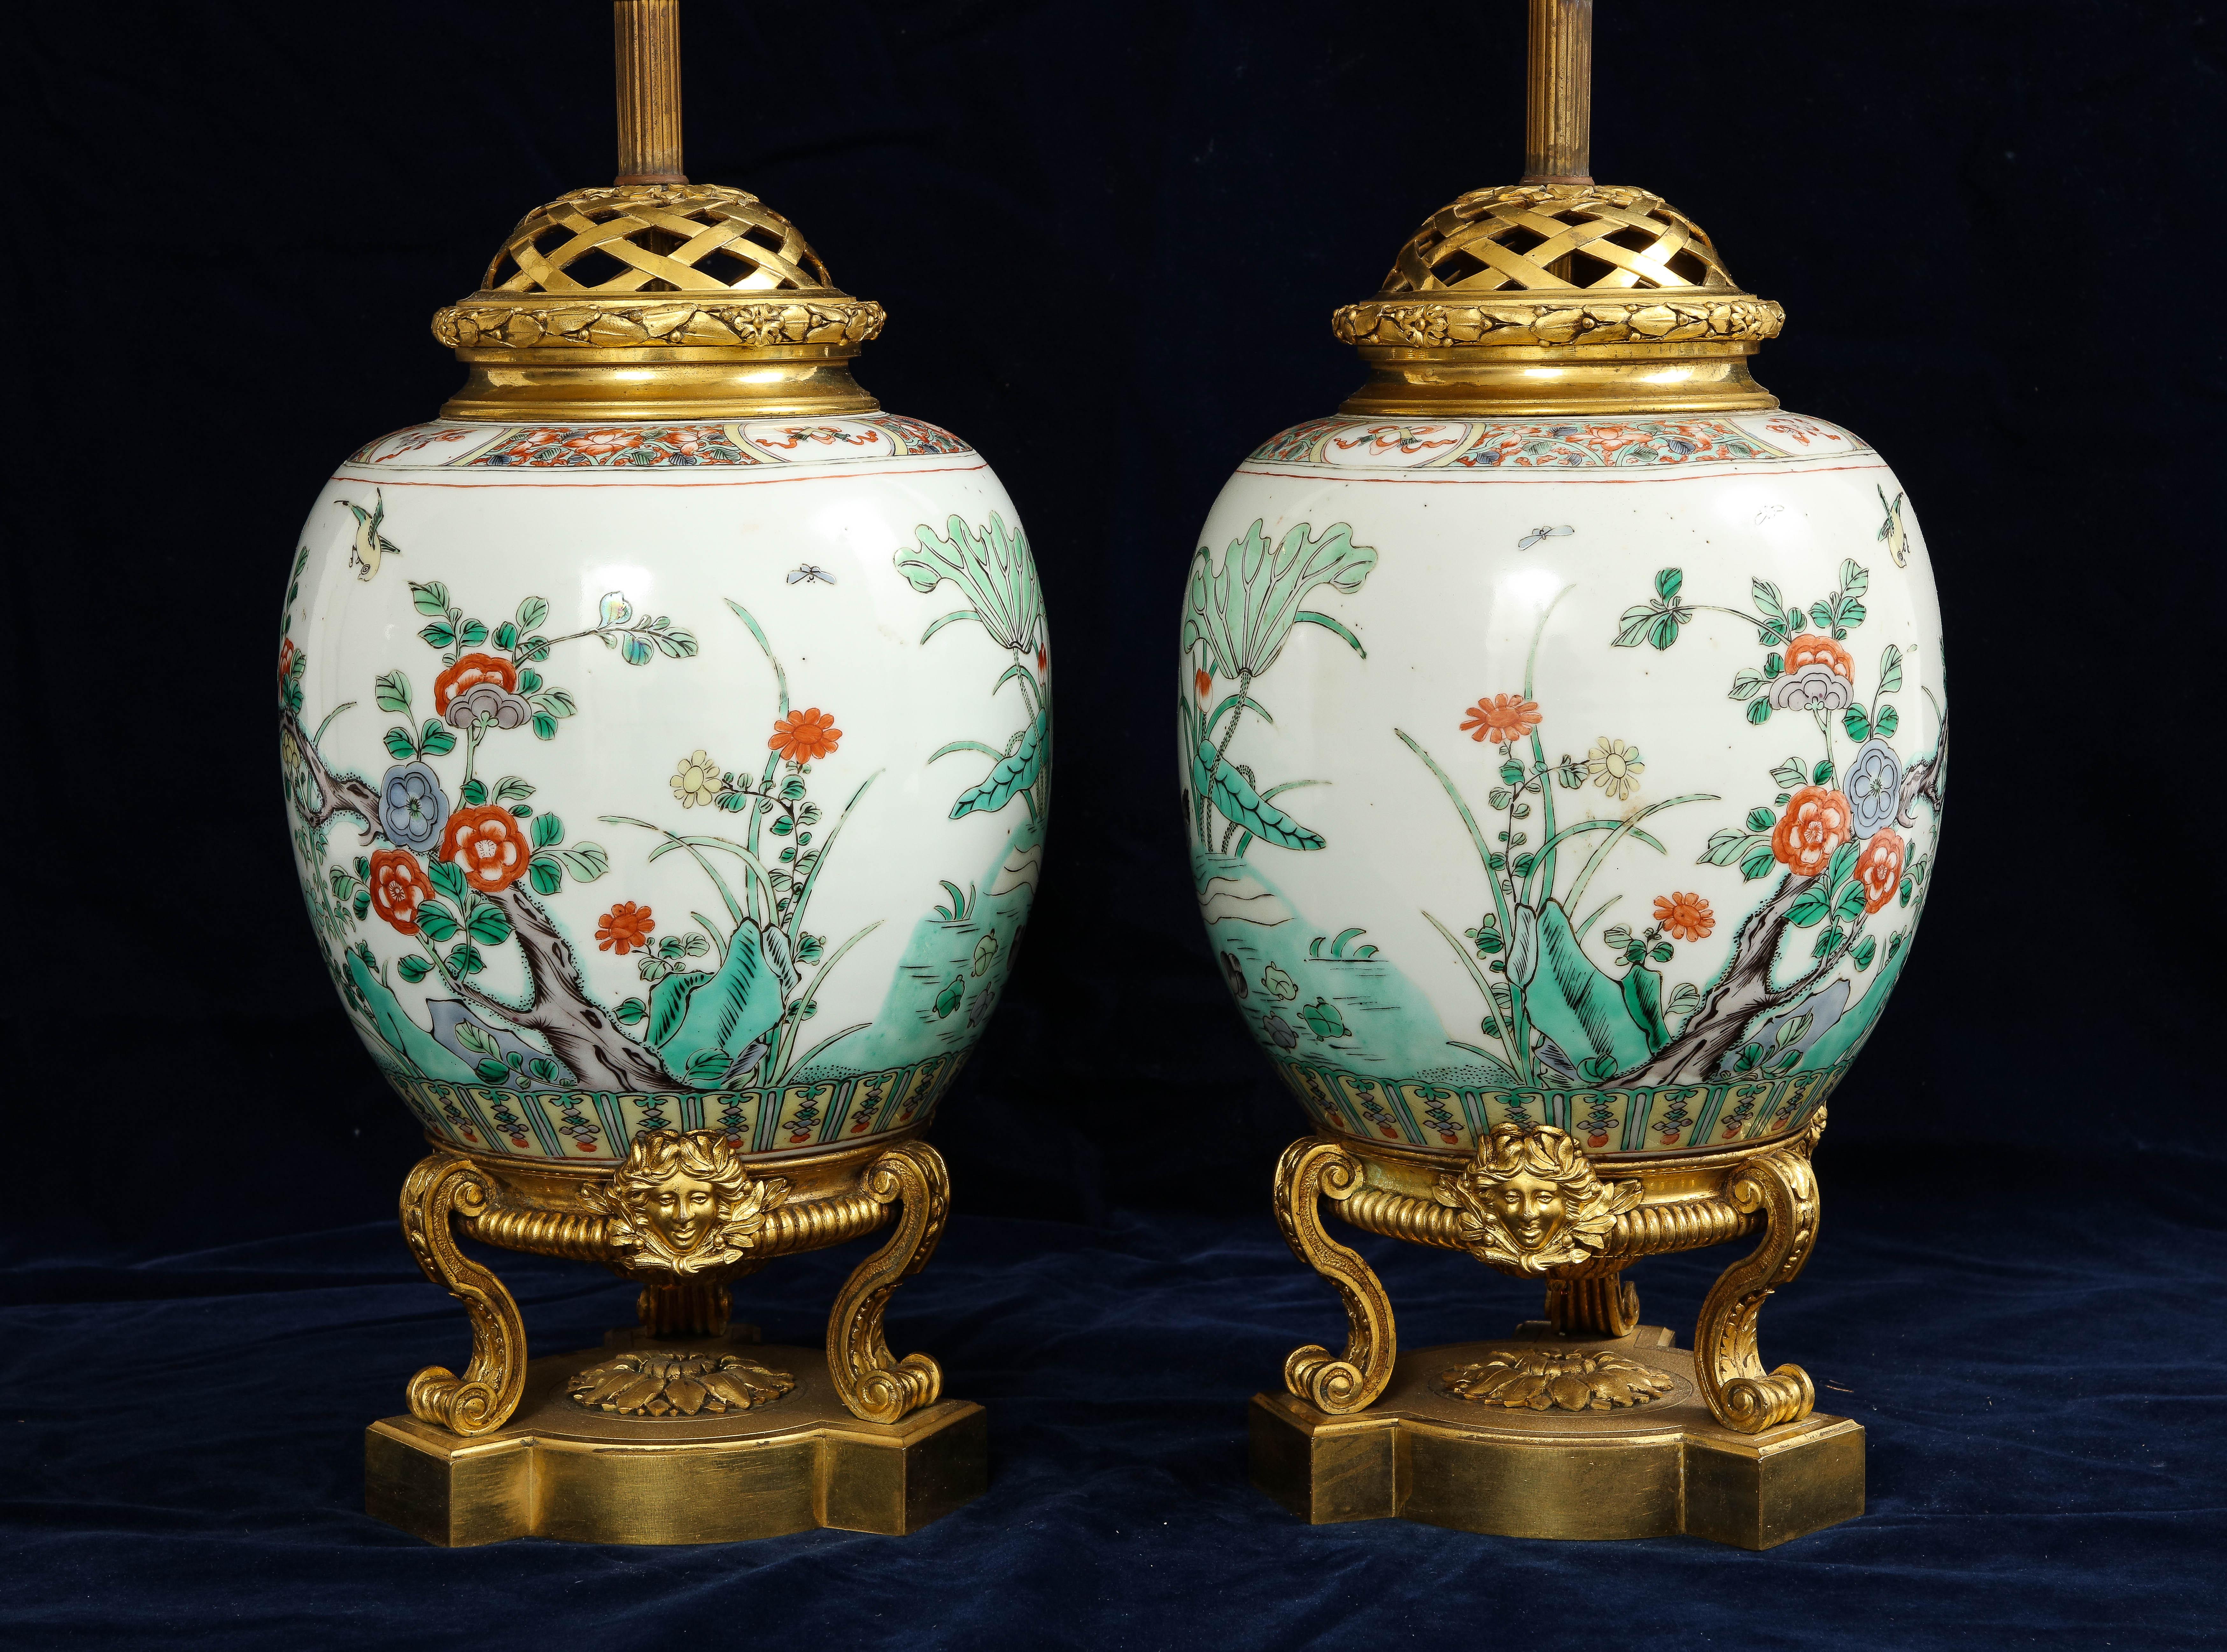 Gilt Pair 19th C Ormolu Mounted Chinese Famille Verte Porcelain Vases Turned to Lamps For Sale